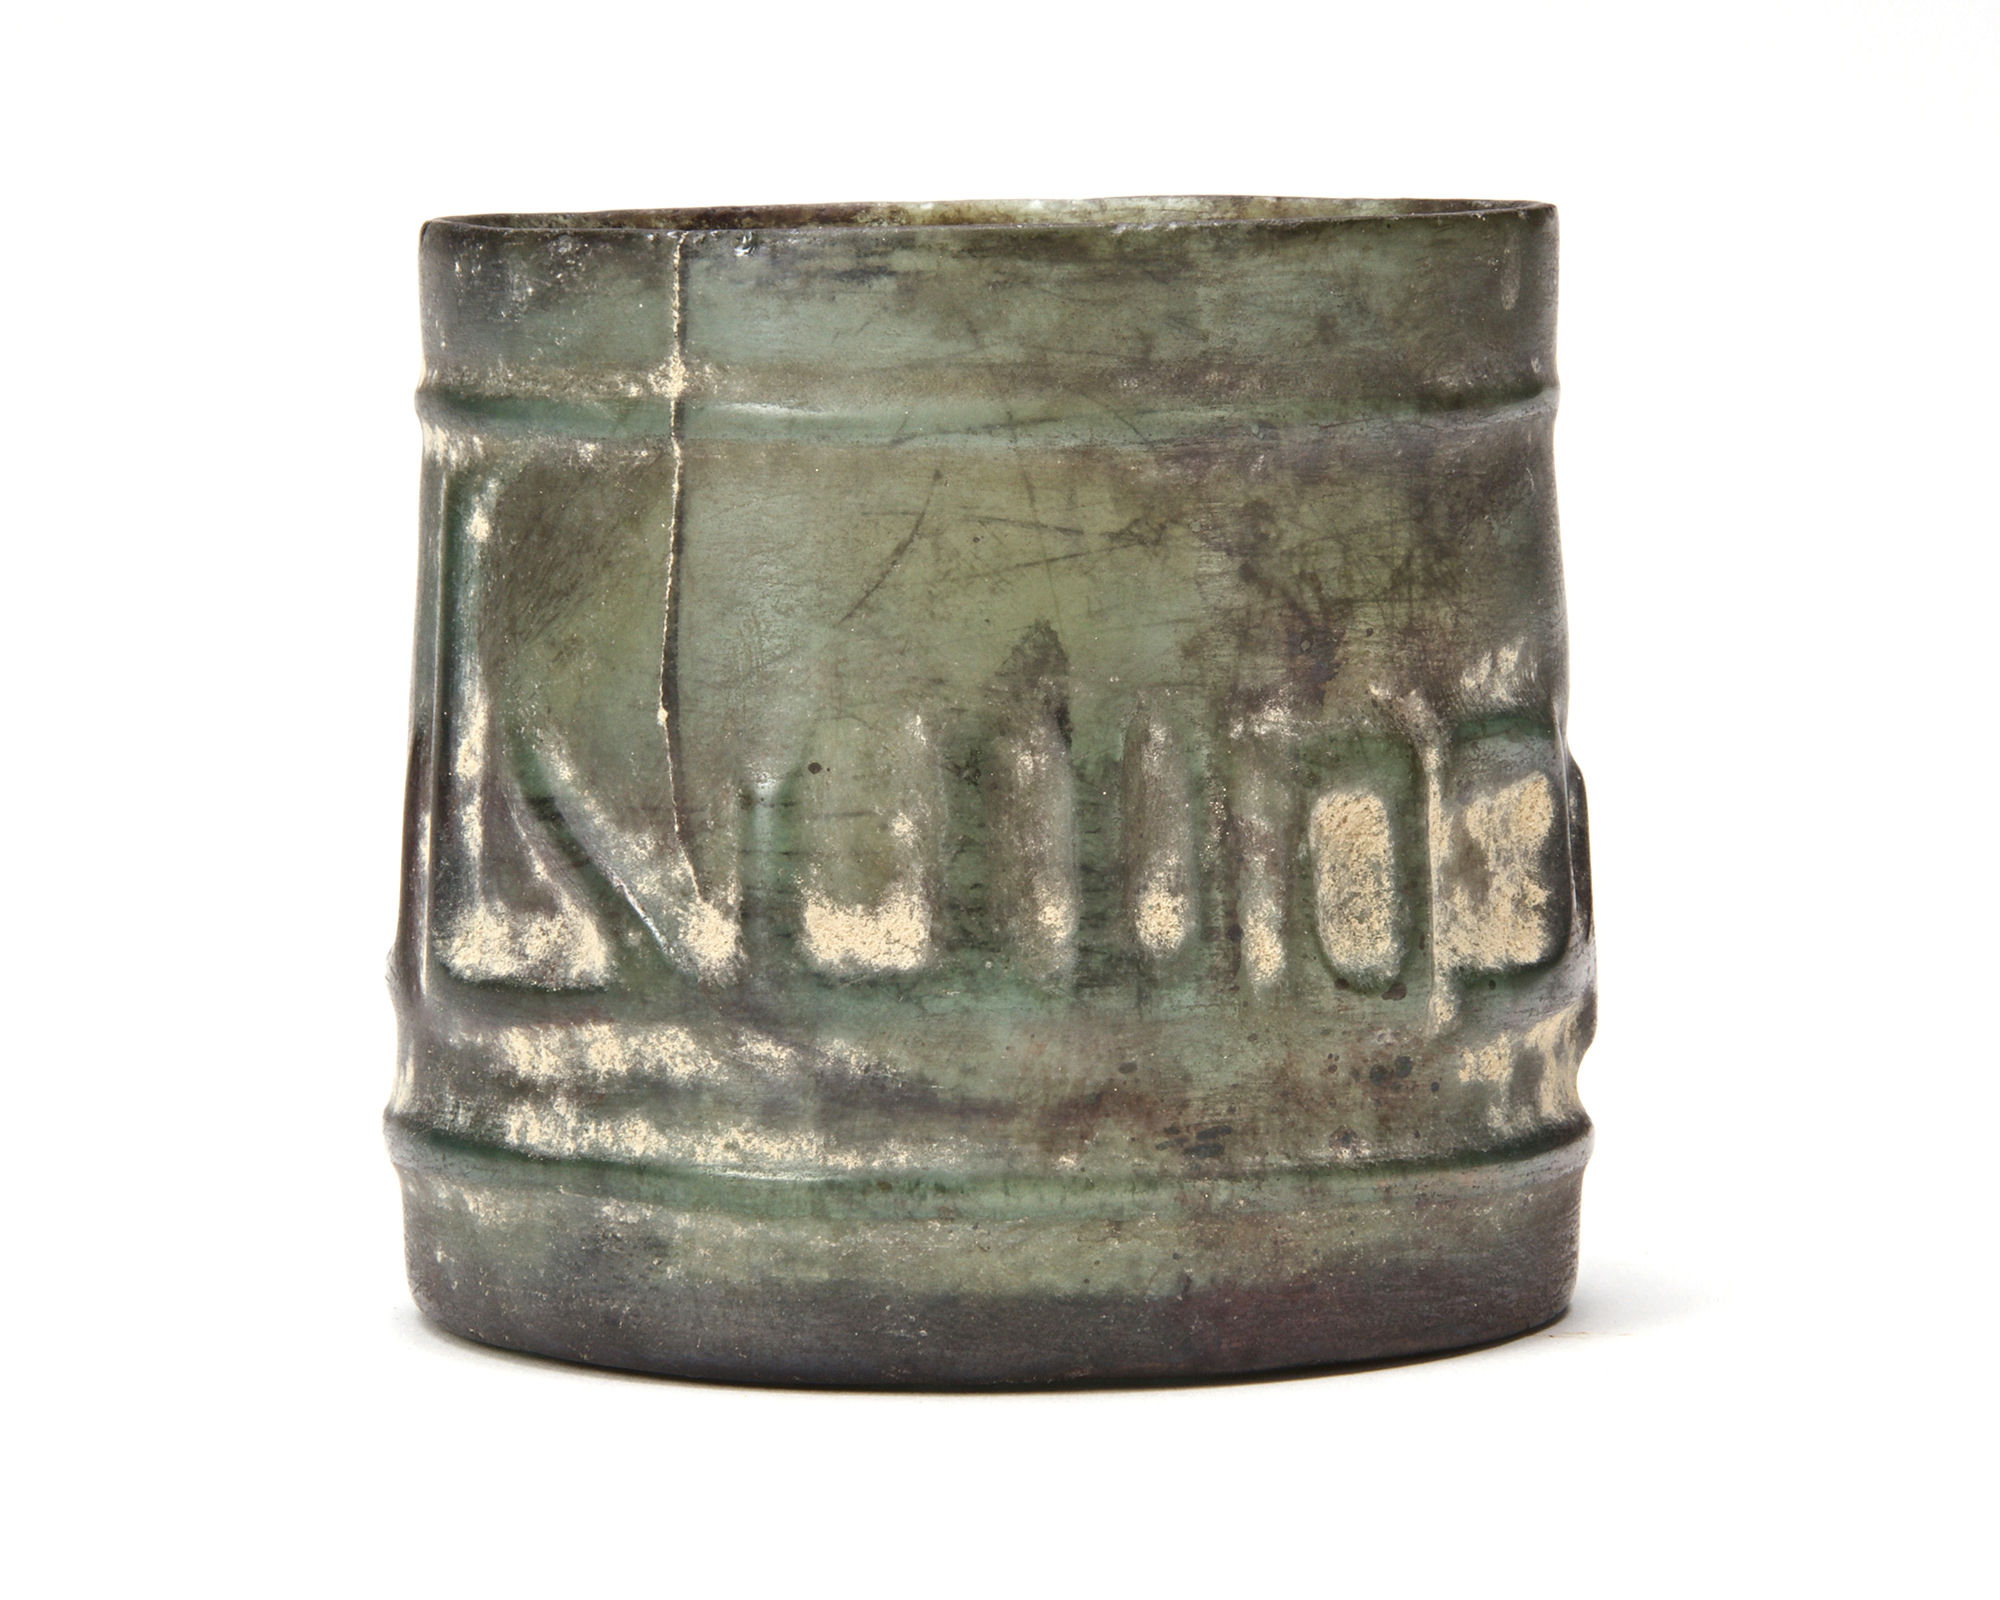 A GLASS BEAKER, SYRIA, 10TH-11TH CENTURY - Image 10 of 14